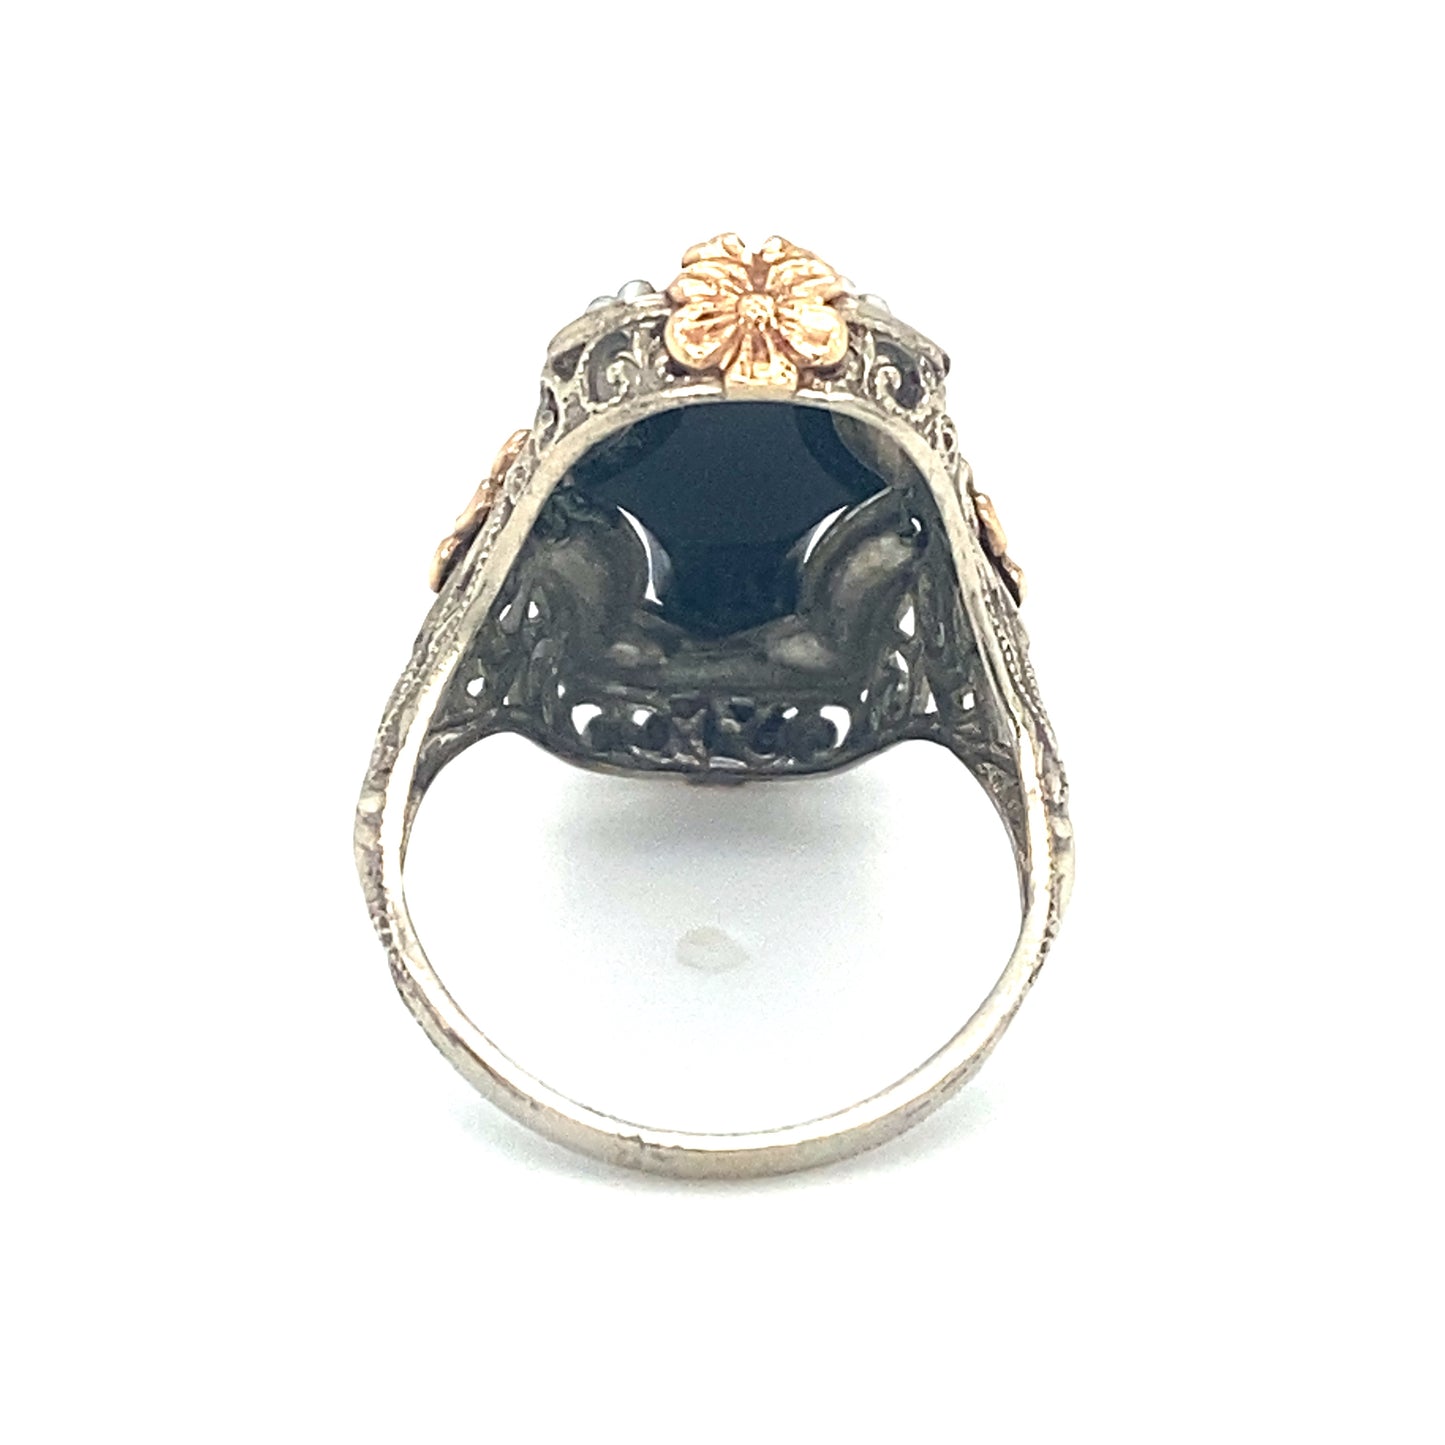 Circa 1920s Art Deco Onyx and Pearl Ring in Two Tone 14K Gold